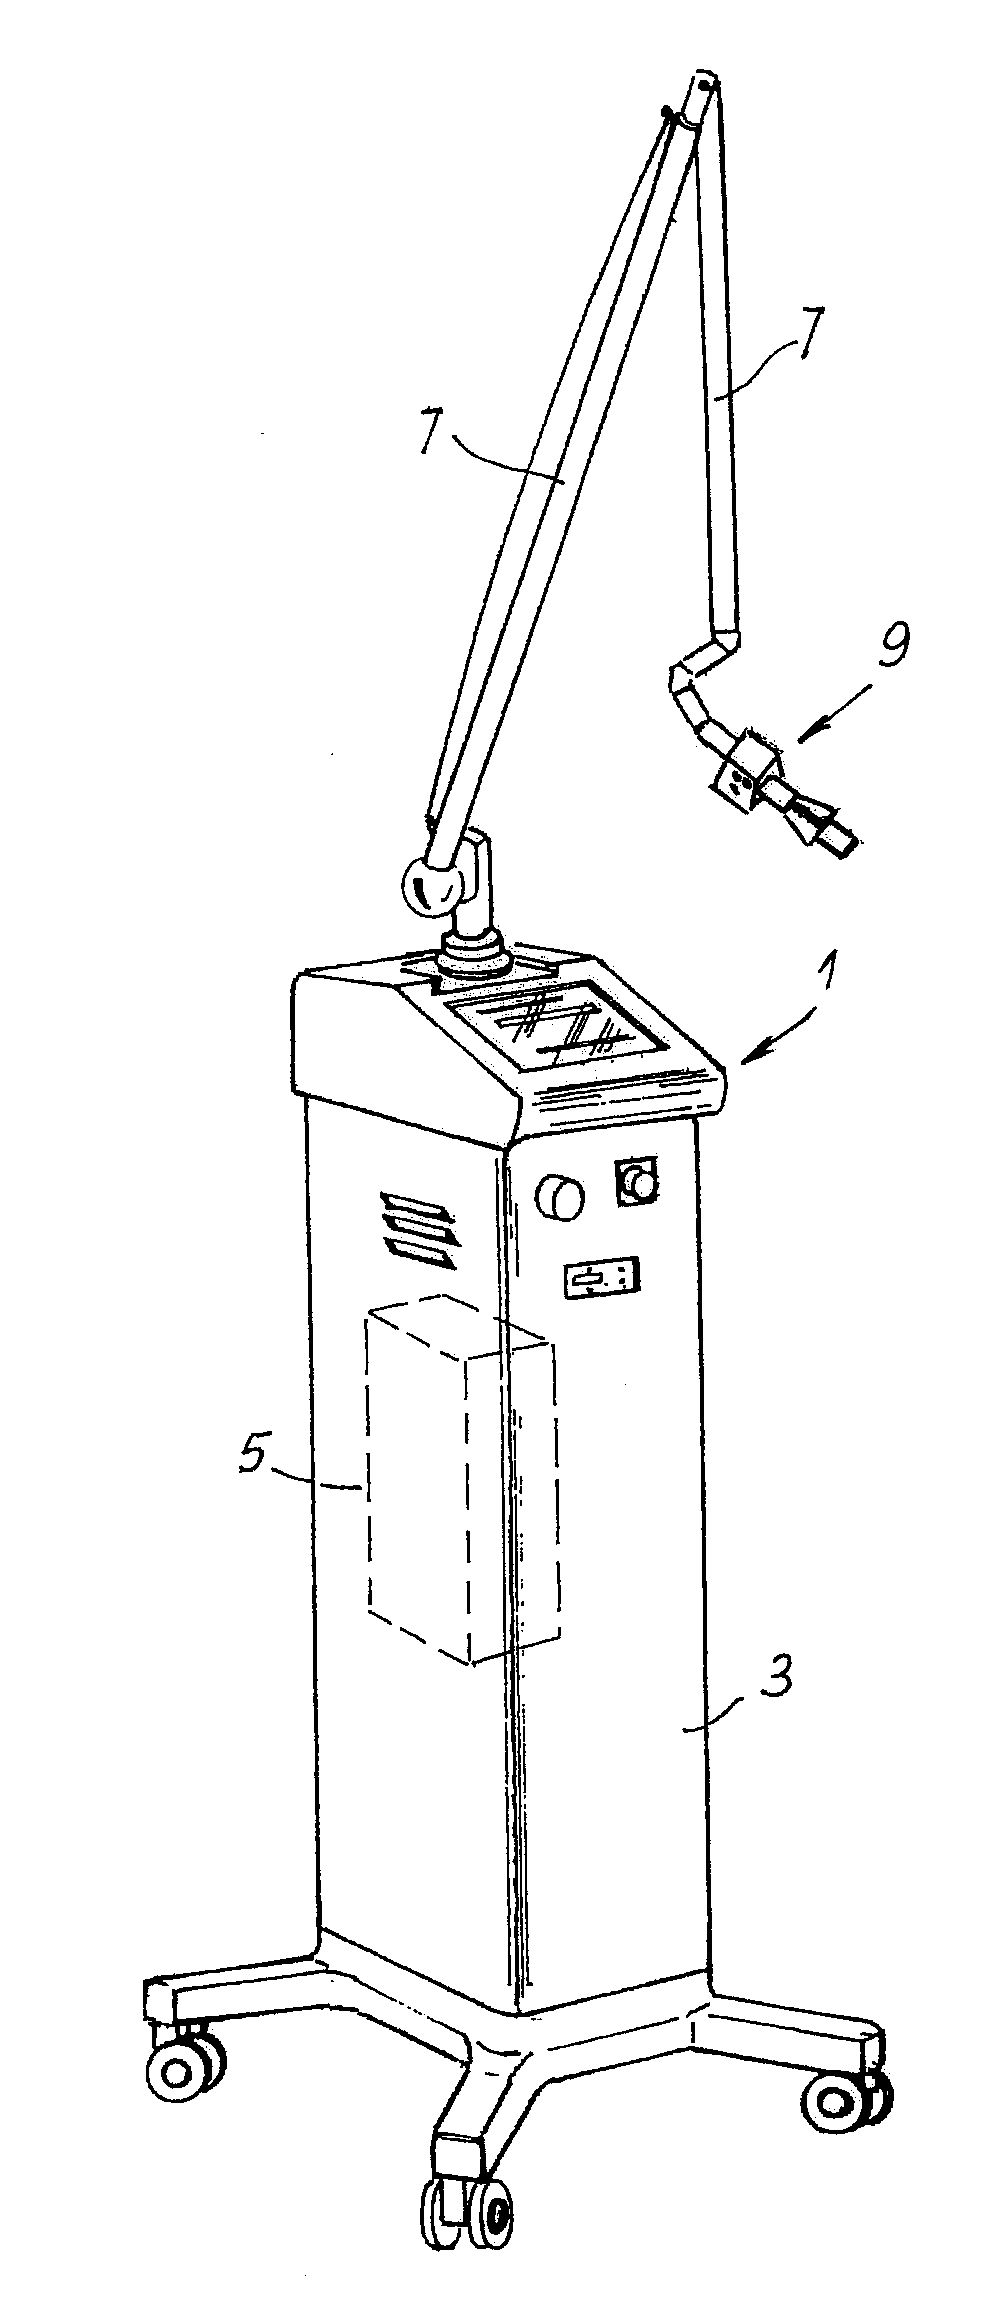 Device and method for treating the epidermis